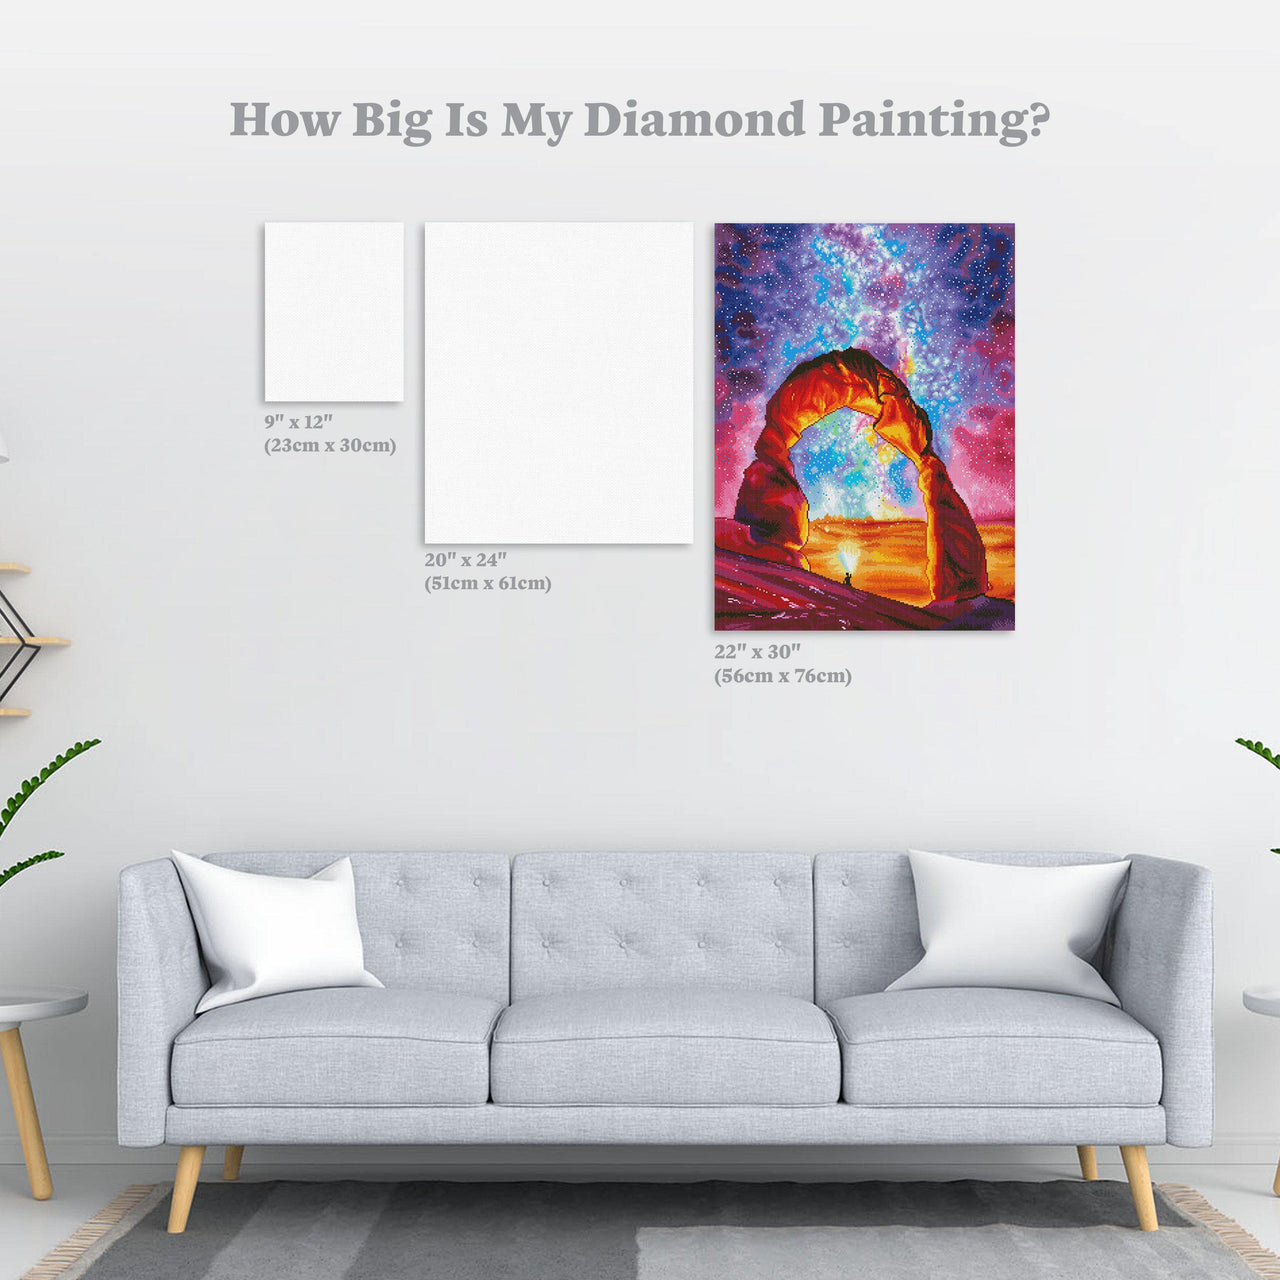 Diamond Painting Milky Way Galaxy 22" x 30″ (56cm x 76cm) / Square with 51 Colors including 2 ABs